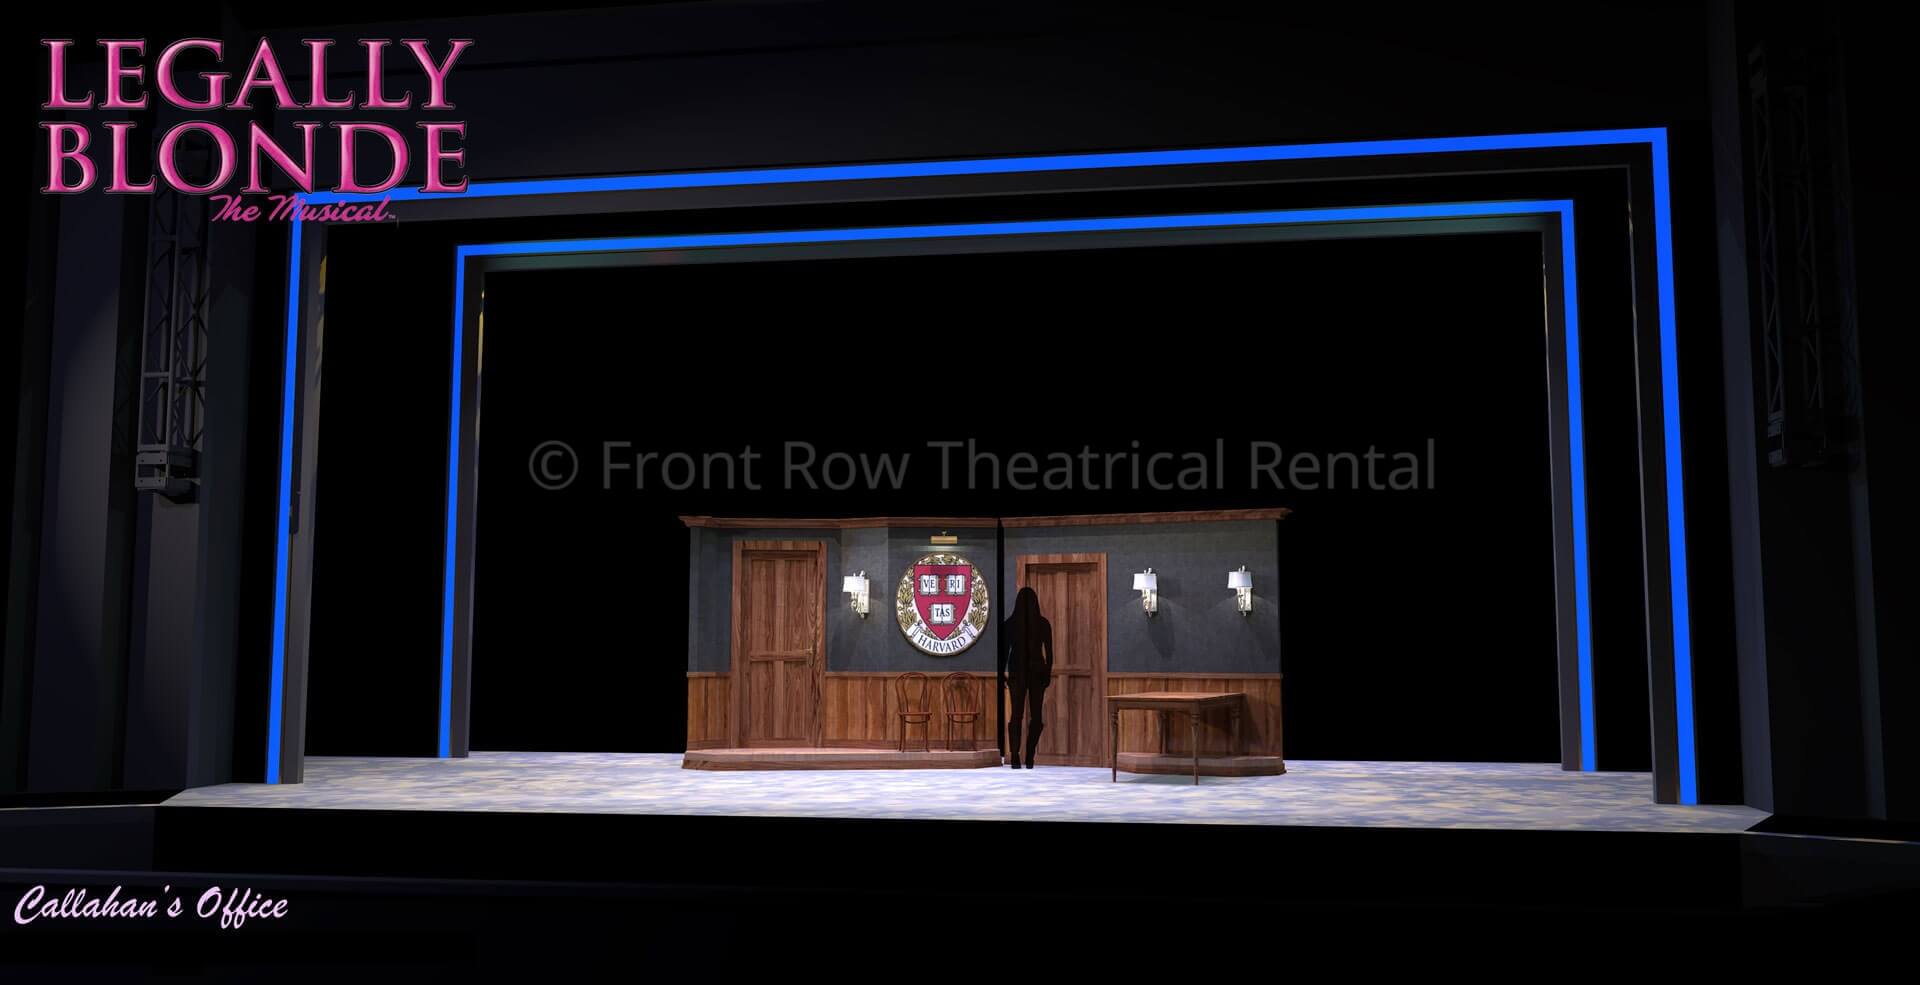 Legally Blonde set rental - Callahan's office - Front Row Theatrical Rental - 800-250-3114